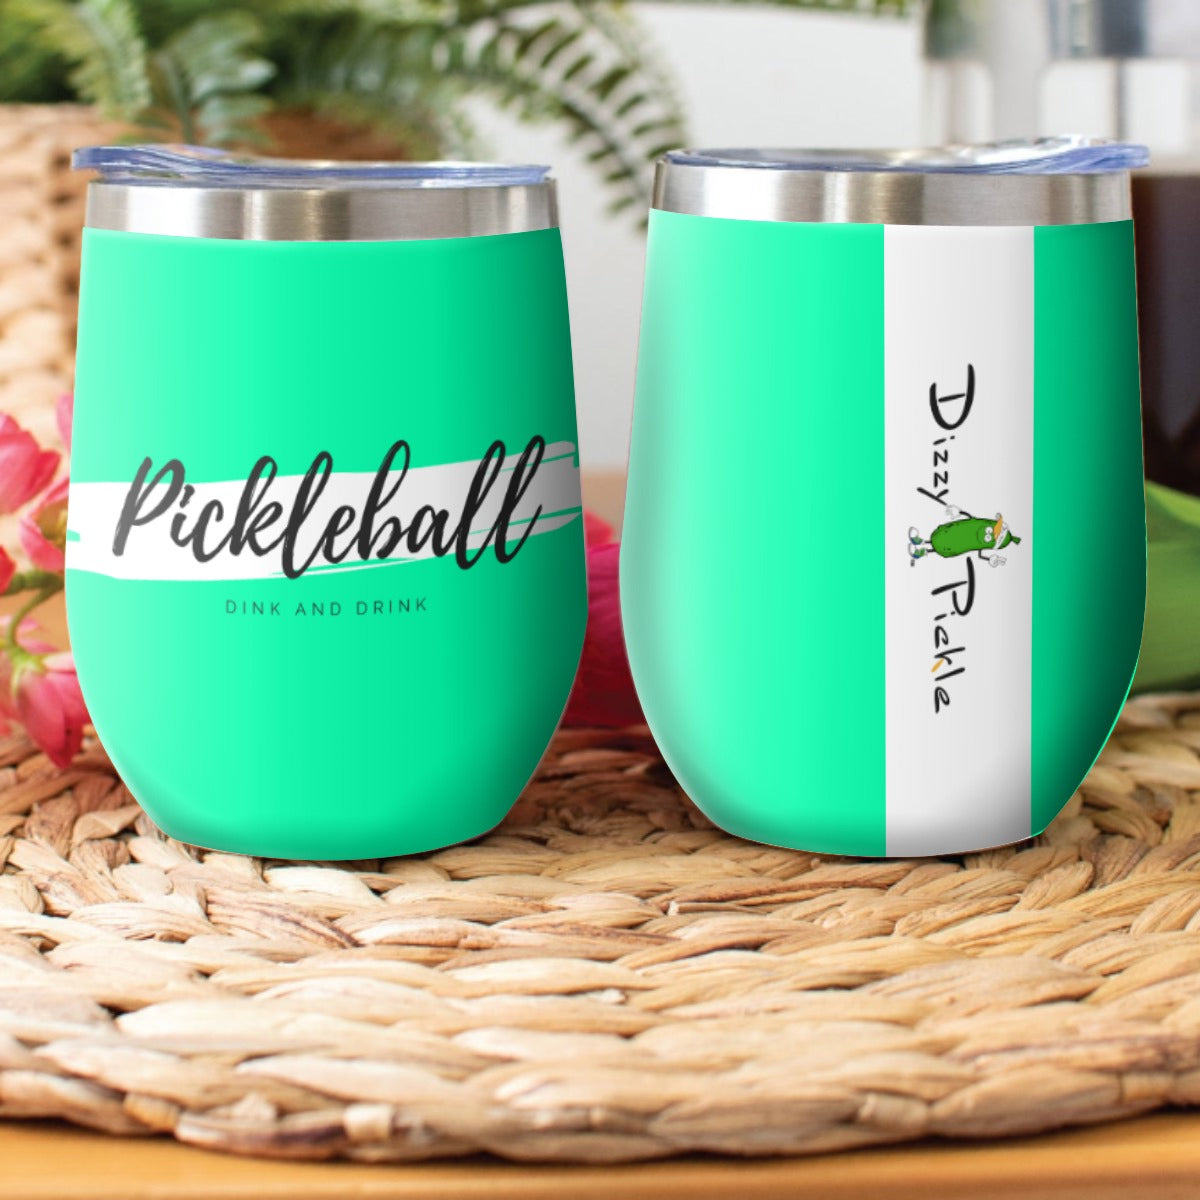 Pickleball Dink and Drink - Seafoam- Stainless Steel Wine Tumbler by Dizzy Pickle